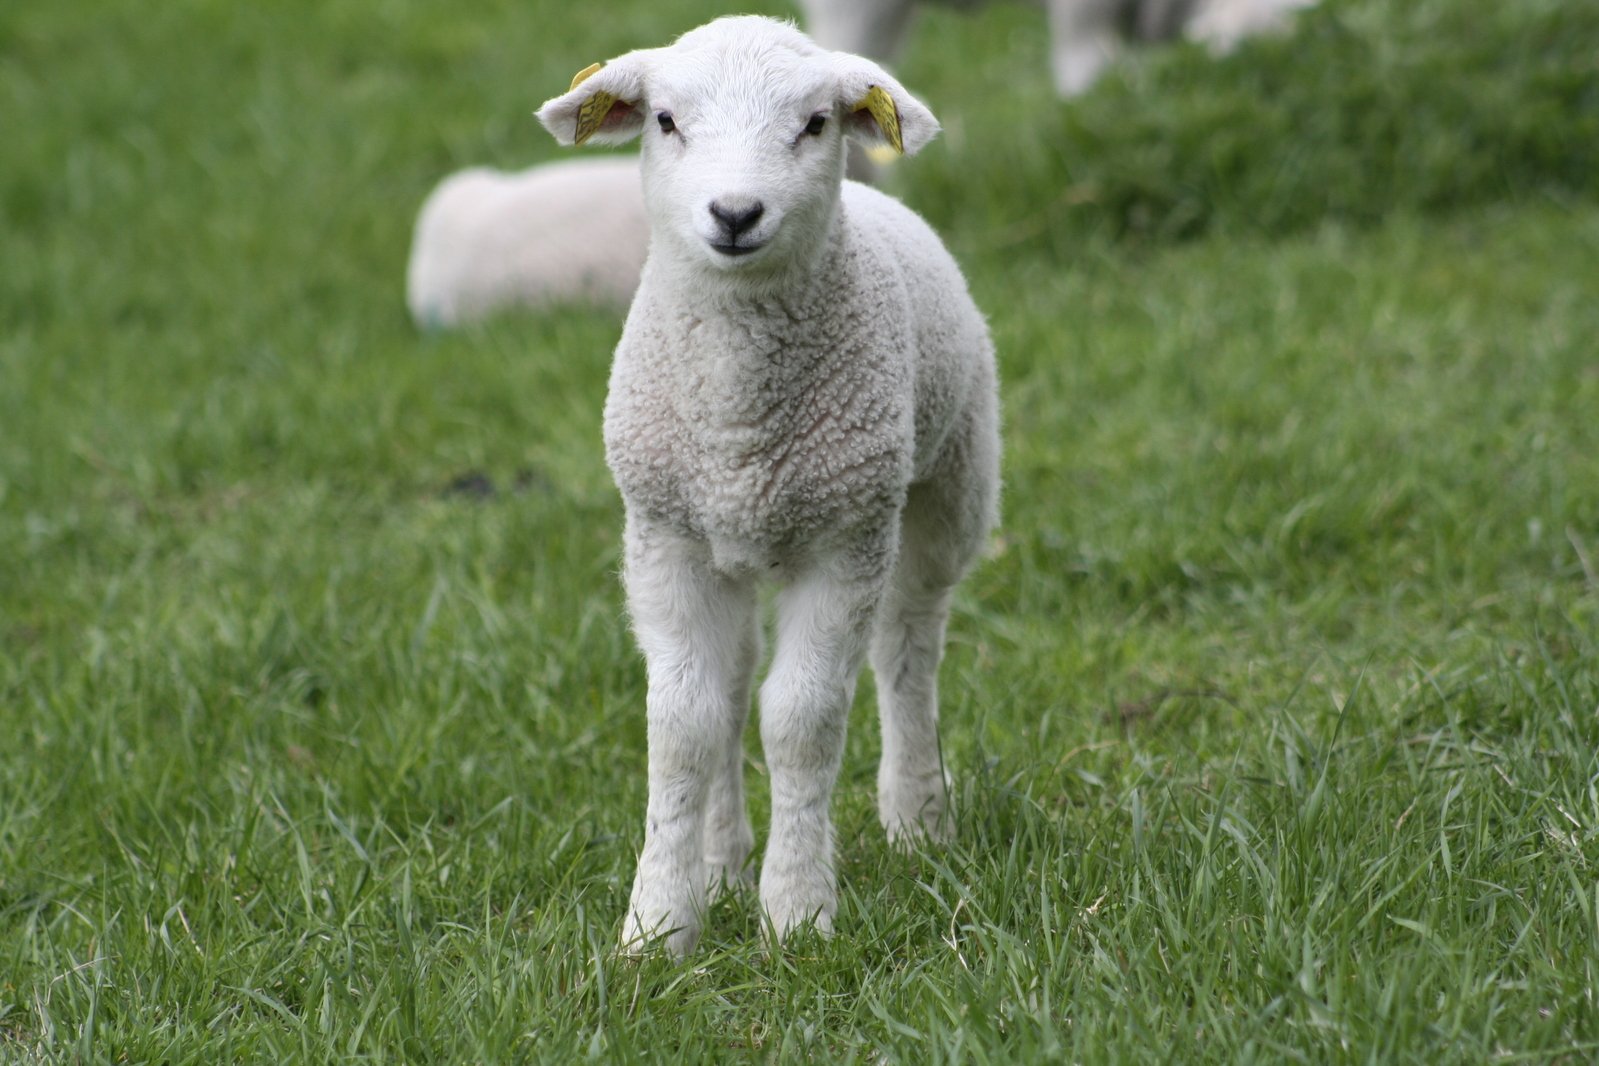 the baby sheep is standing alone in the grass